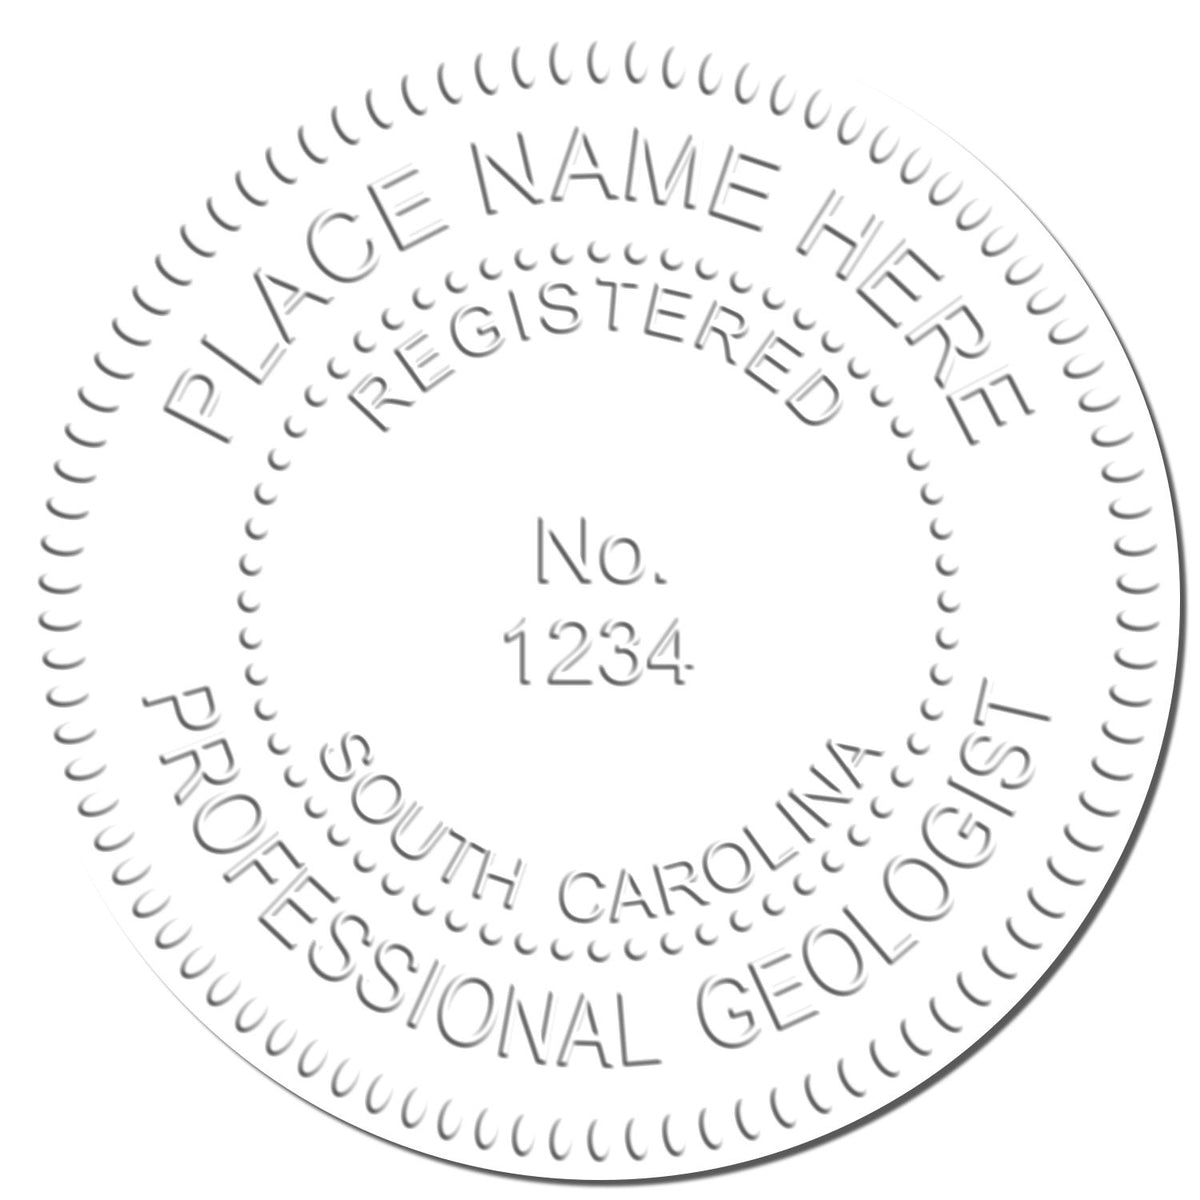 The South Carolina Geologist Desk Seal stamp impression comes to life with a crisp, detailed image stamped on paper - showcasing true professional quality.